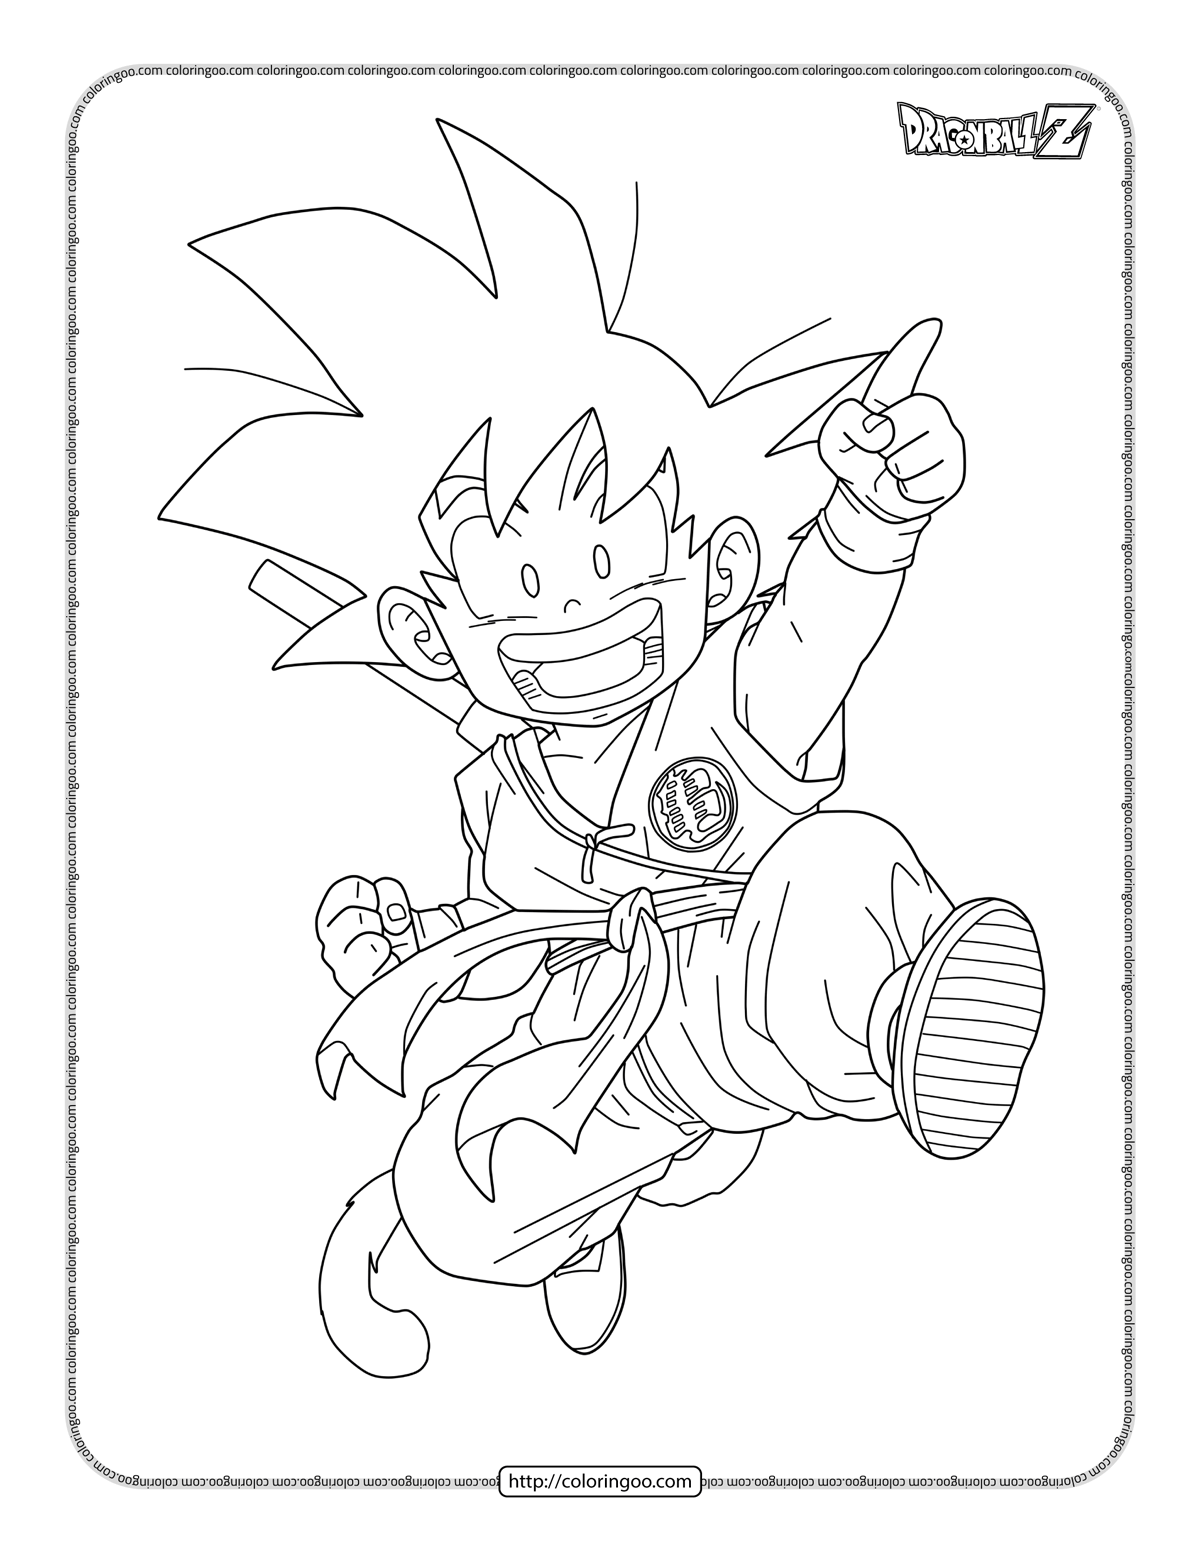 childhood goku coloring pages